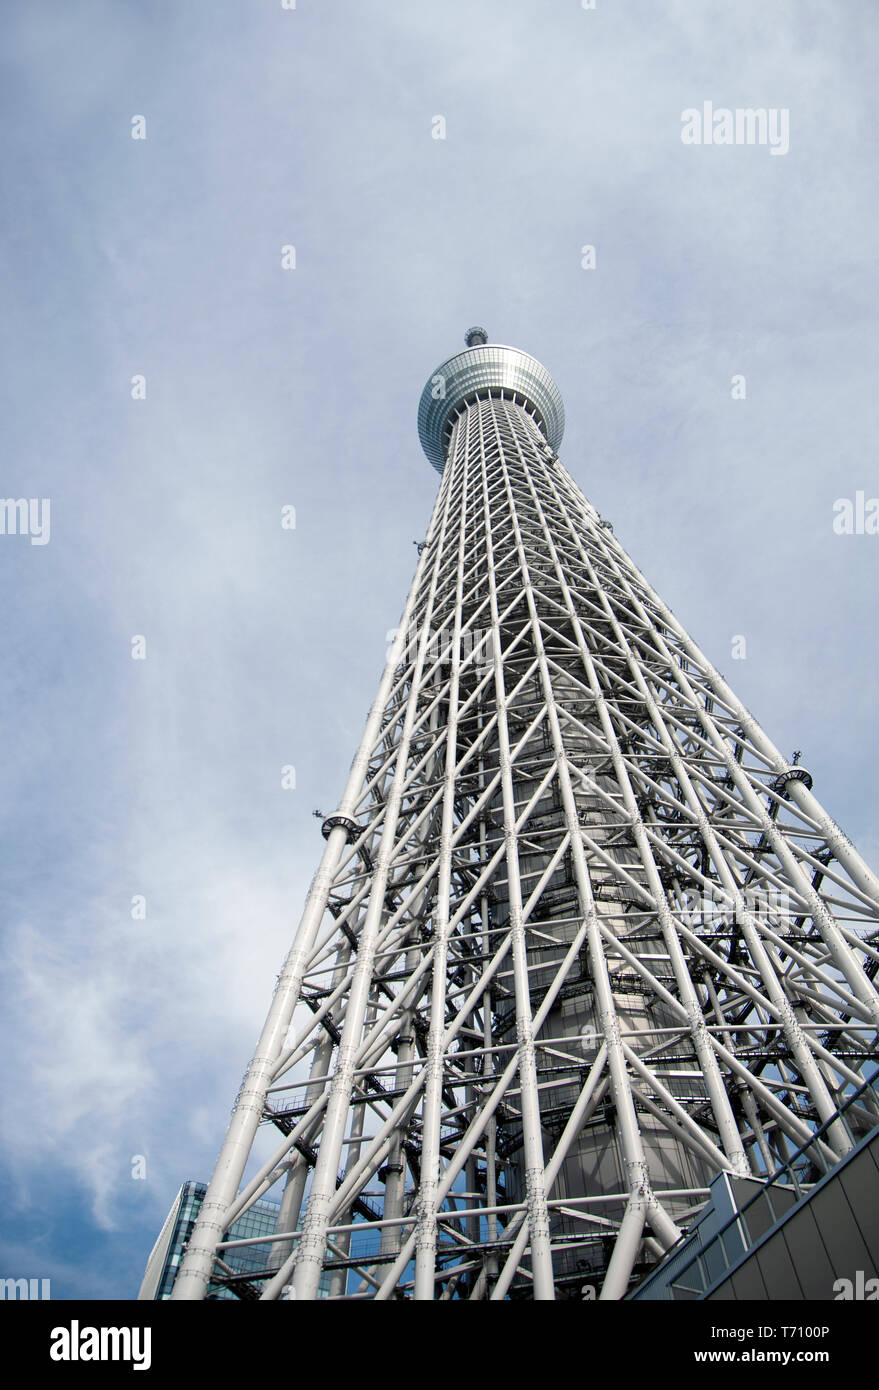 Tokyo Skytree broadcasting and observation tower seen from below. At 634 metres high this is the world's tallest broadcasting tower. Stock Photo